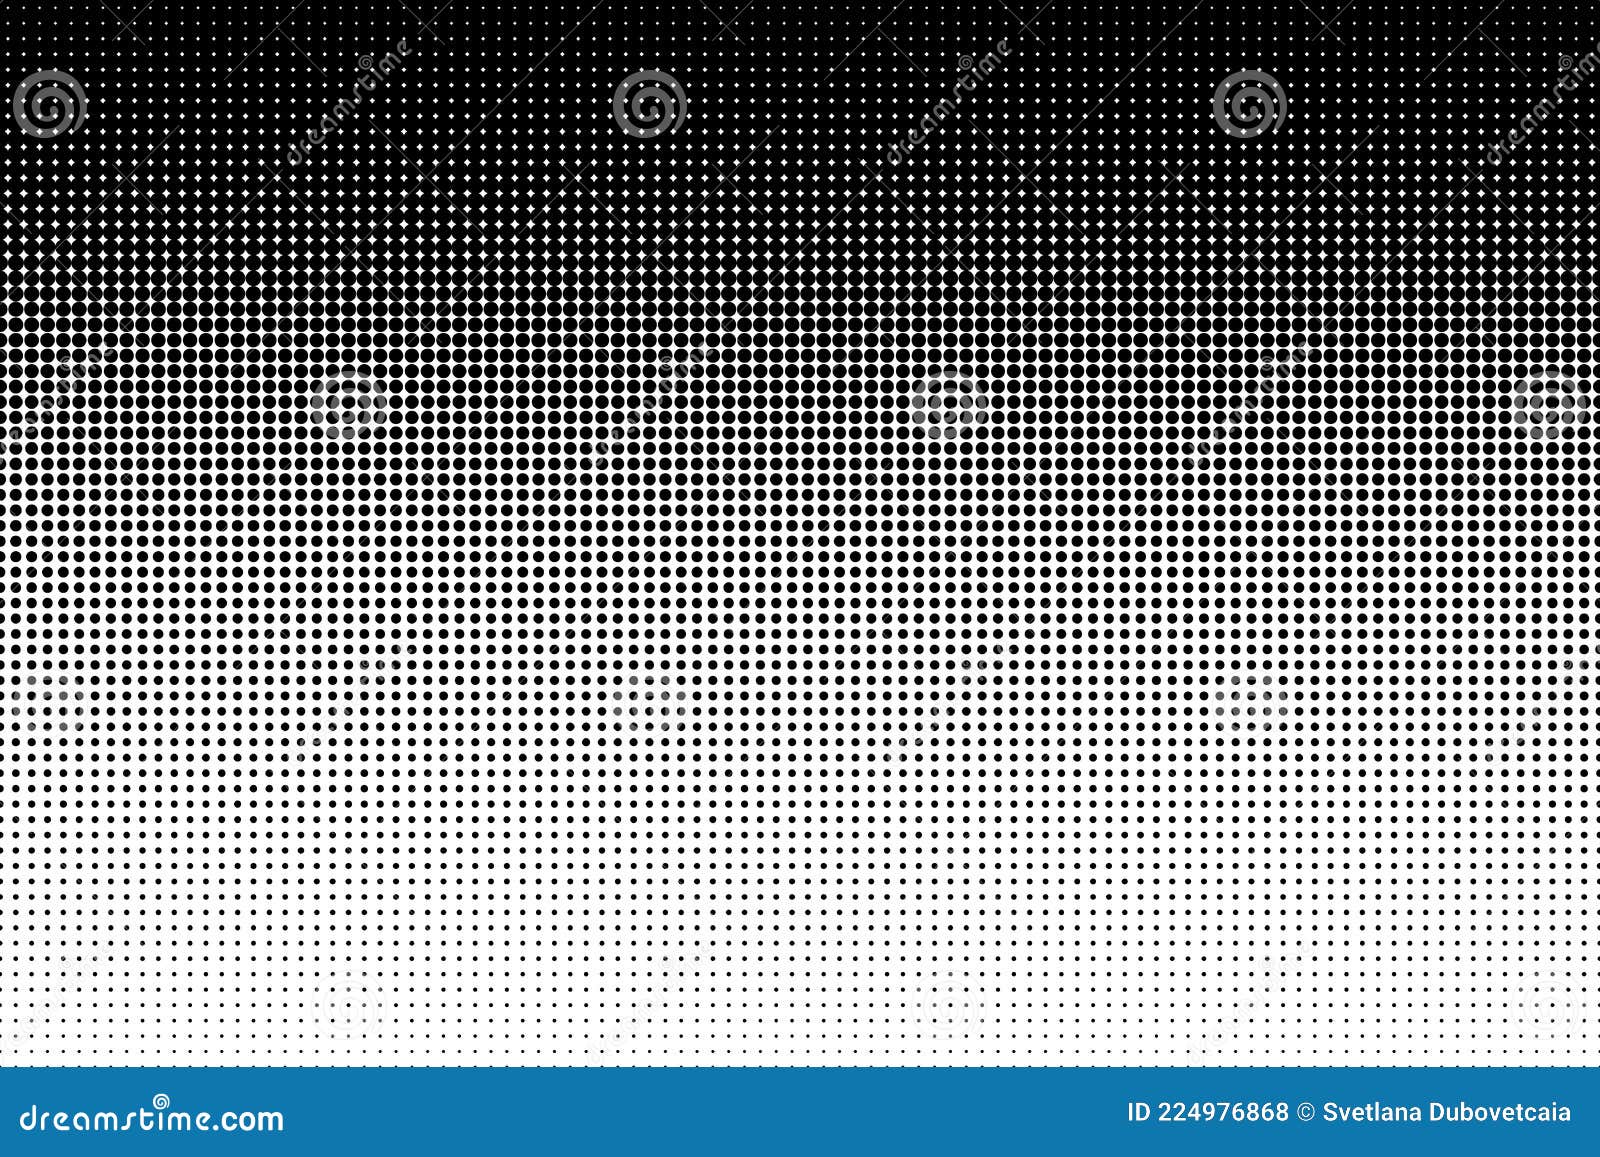 dot perforation texture. dots halftone pattern. faded shade background. noise gradation border. black pattern  on white ba